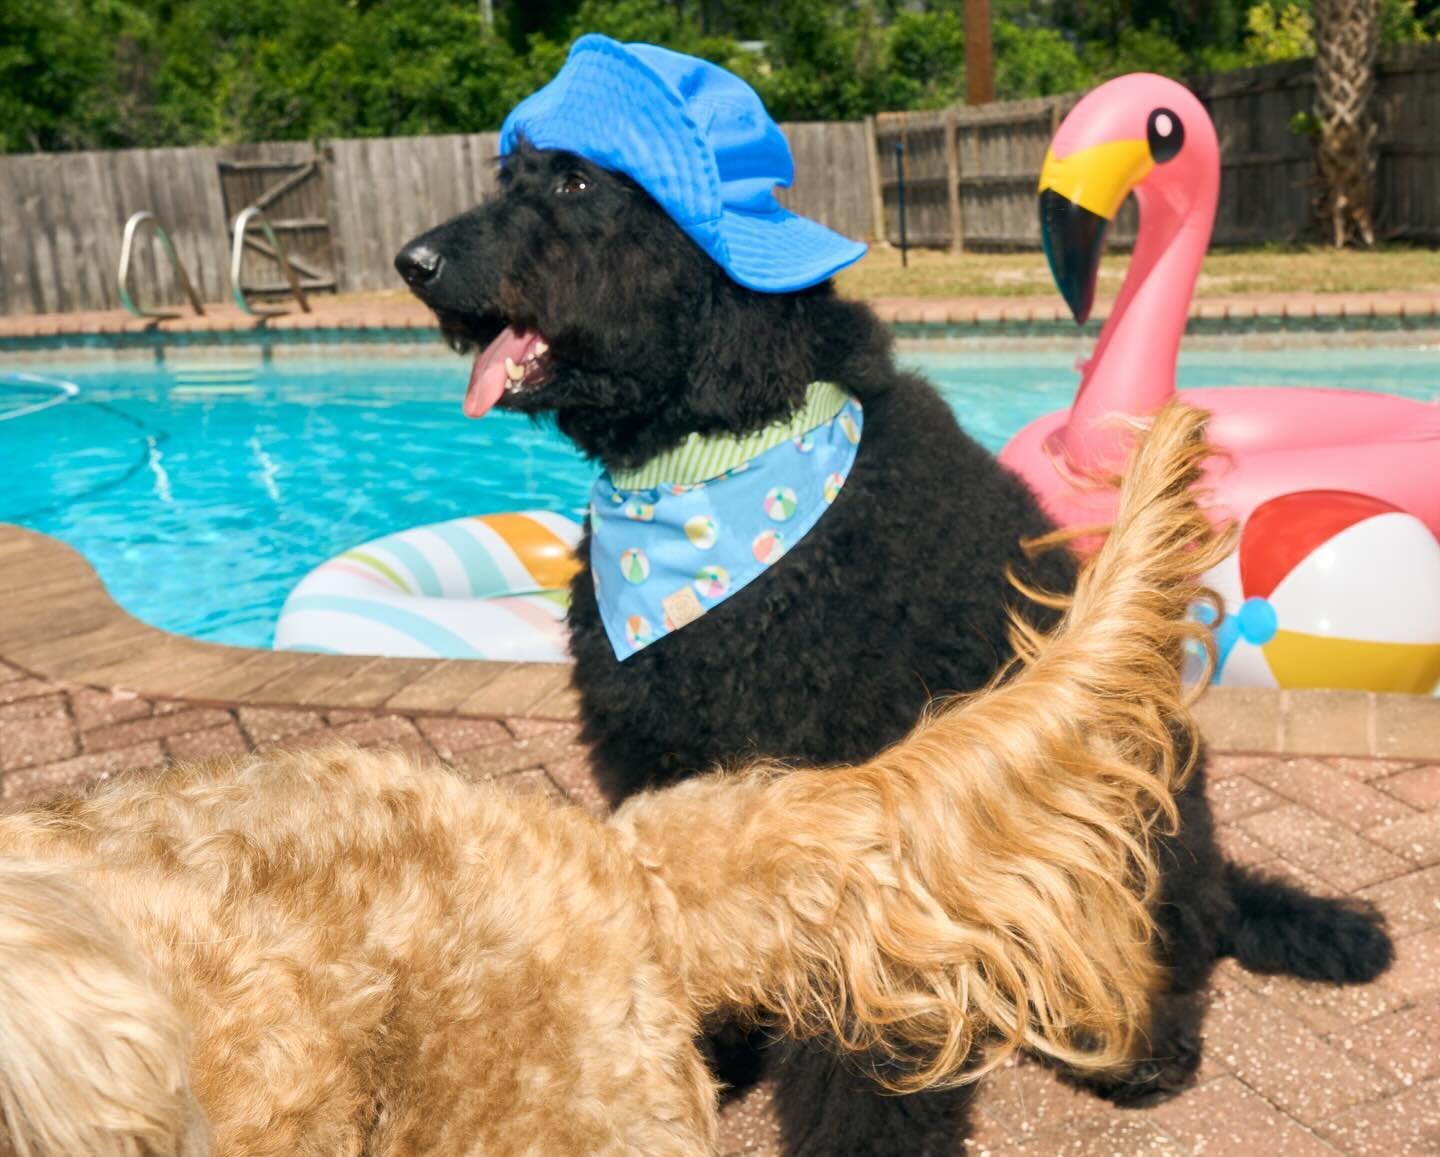 Our tails were wagging with excitement during our pool pawty 🐶🪩 Mark your calendars - our new summer collection is dropping Friday May 10th at 12pm EST 🍔🛼🌭☀️🌈 
.
.
.
.
#dogbandanas #dogfashionista #peiandthreads #dogstyle #petfashion #dogcollar